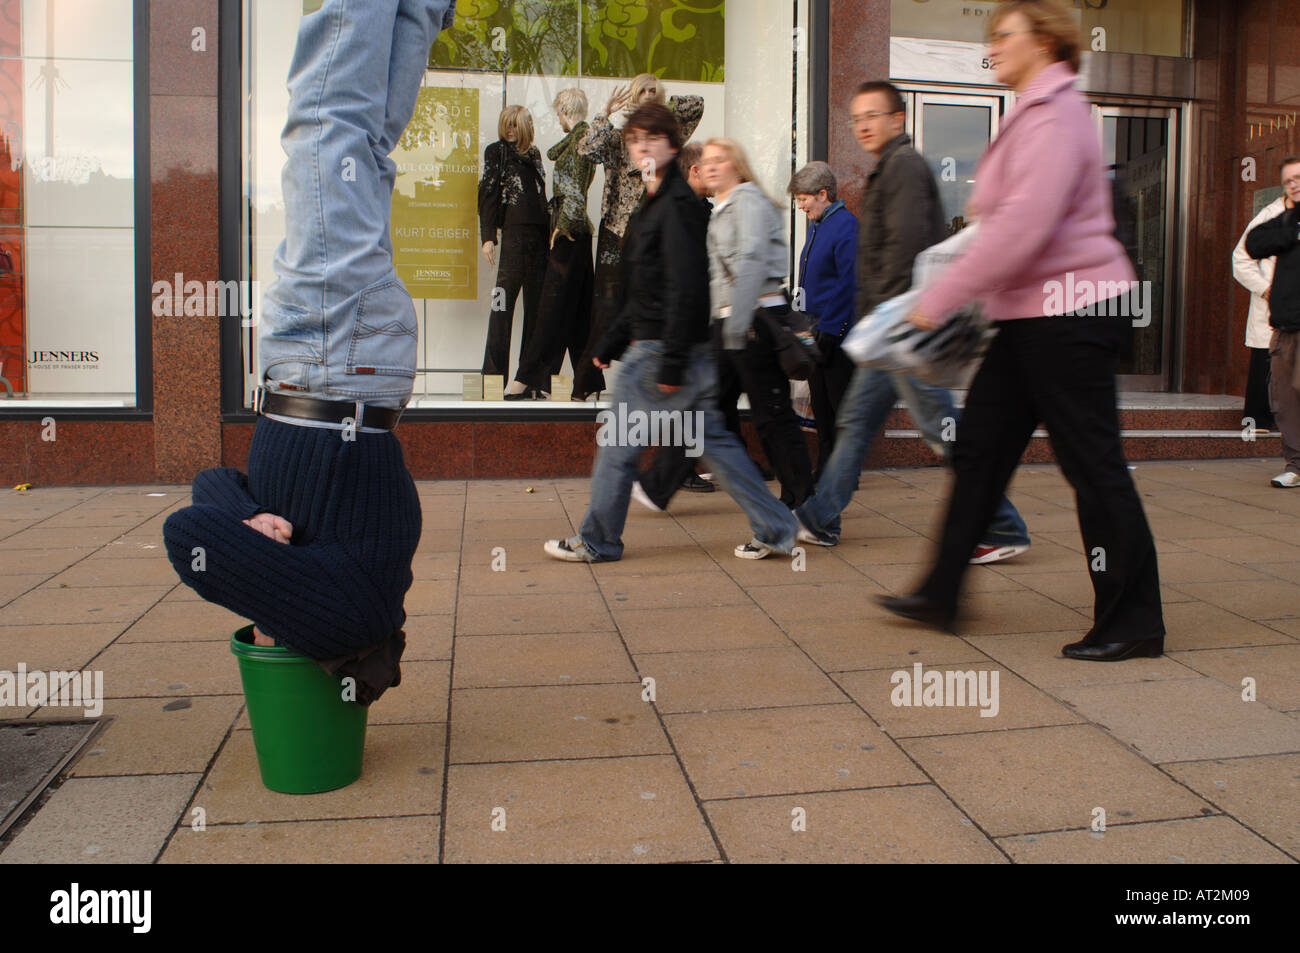 Man upside down with his head in a bucket outside Jenners on Princes Street, Edinburgh, Scotland Stock Photo